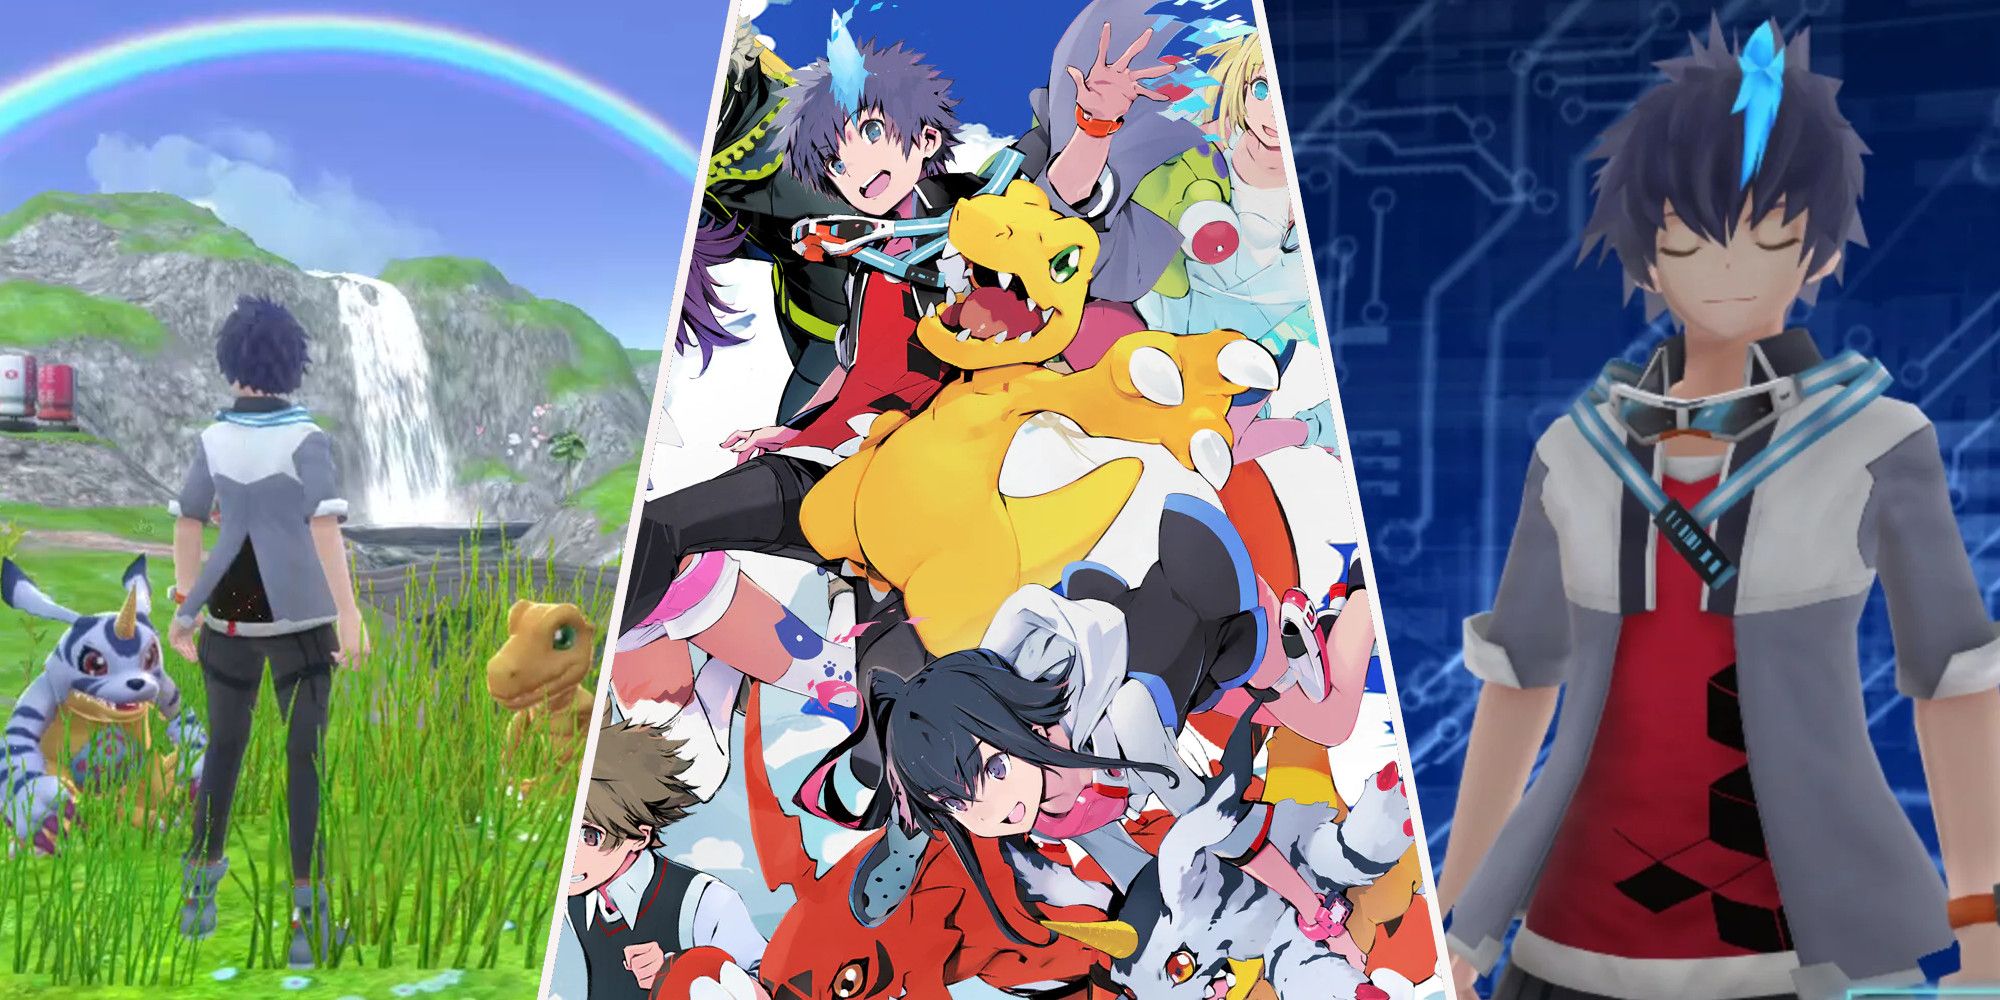 Main Male Protagonist Digimon World Next Order, Next Order's Promo Art, and Main Male Protagonist Standing In Upgrade Screen With Eyes Closed